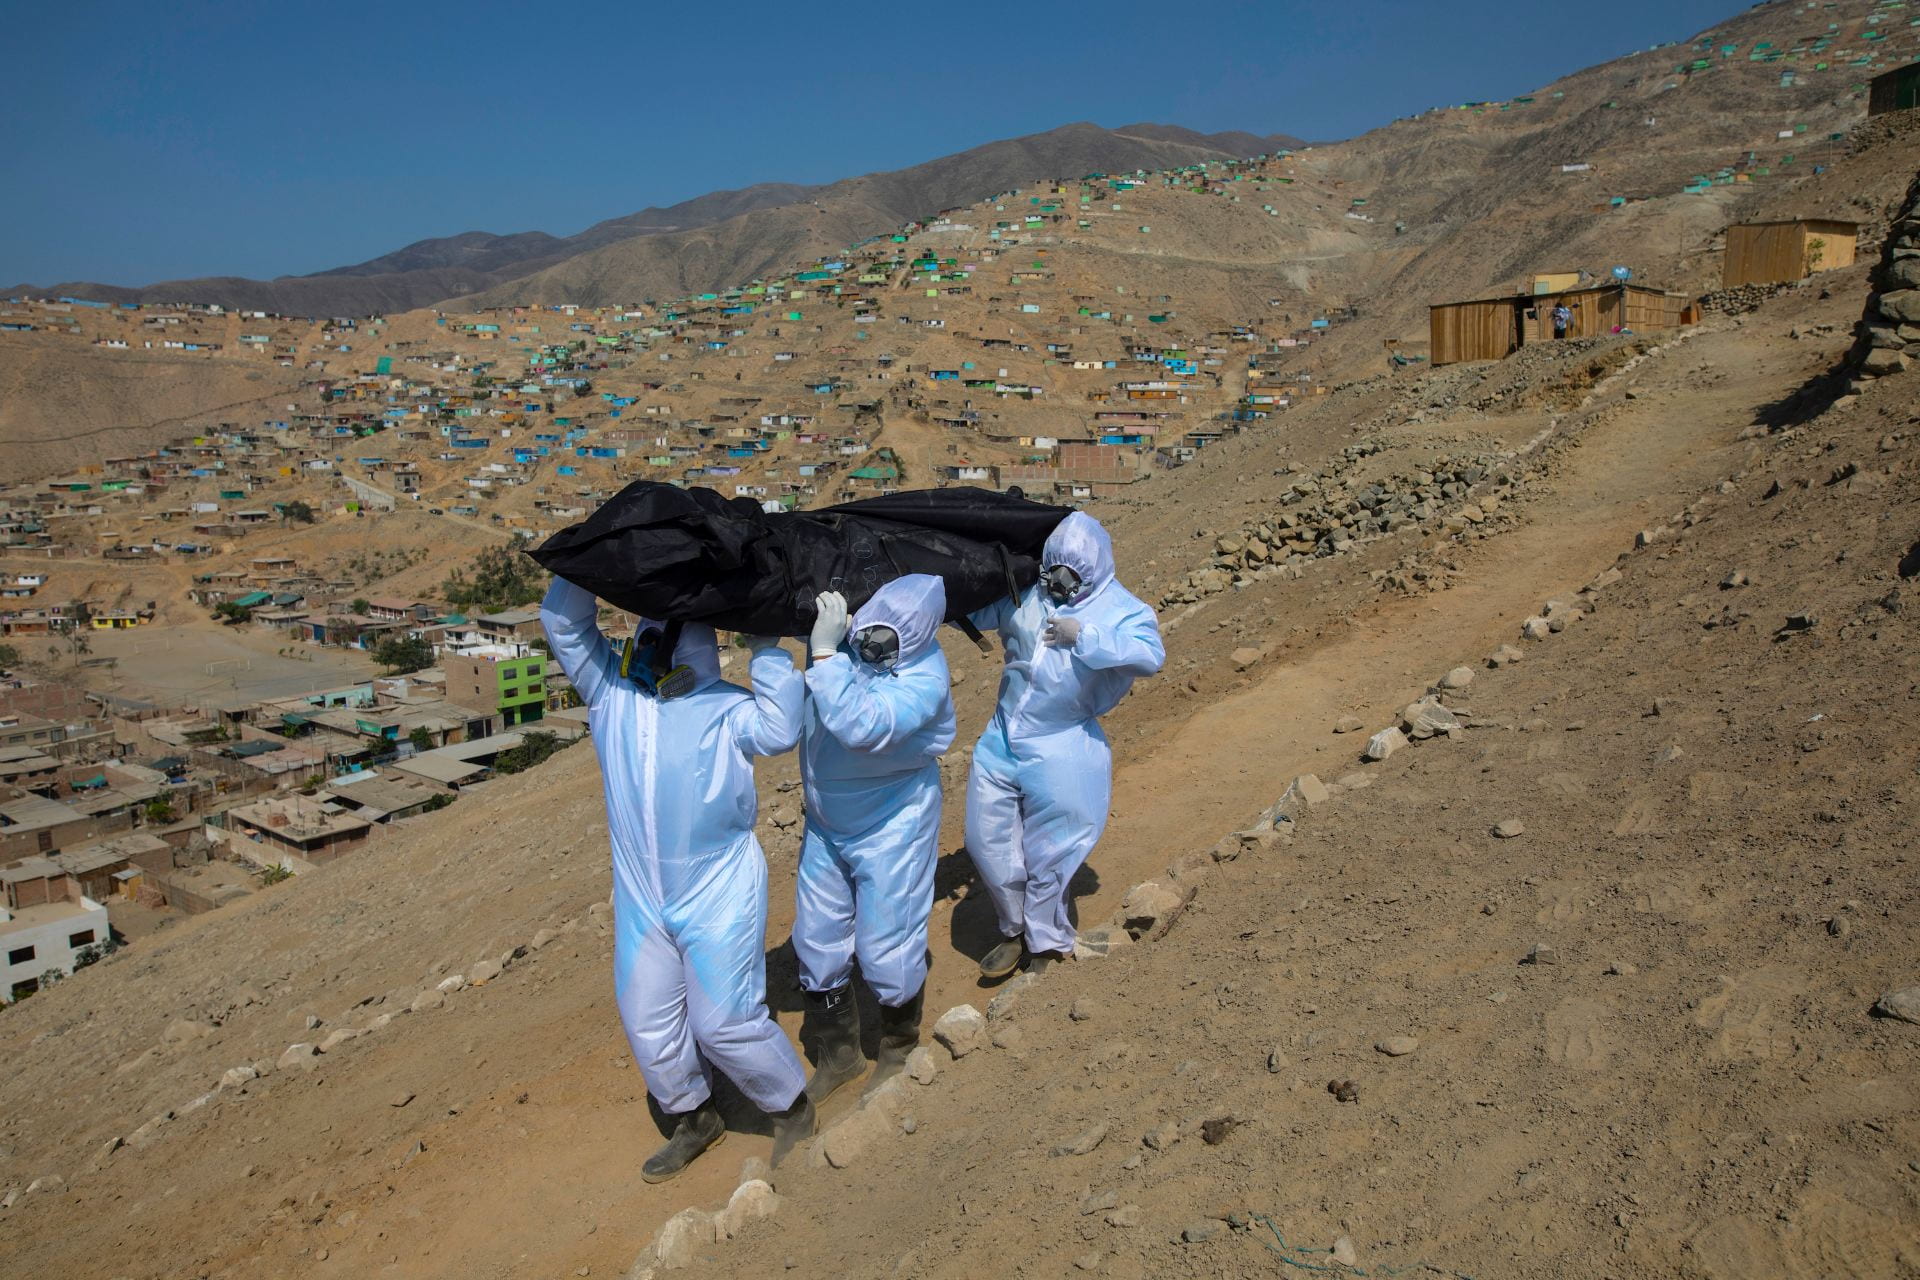 three people carrying a dead body in a desert